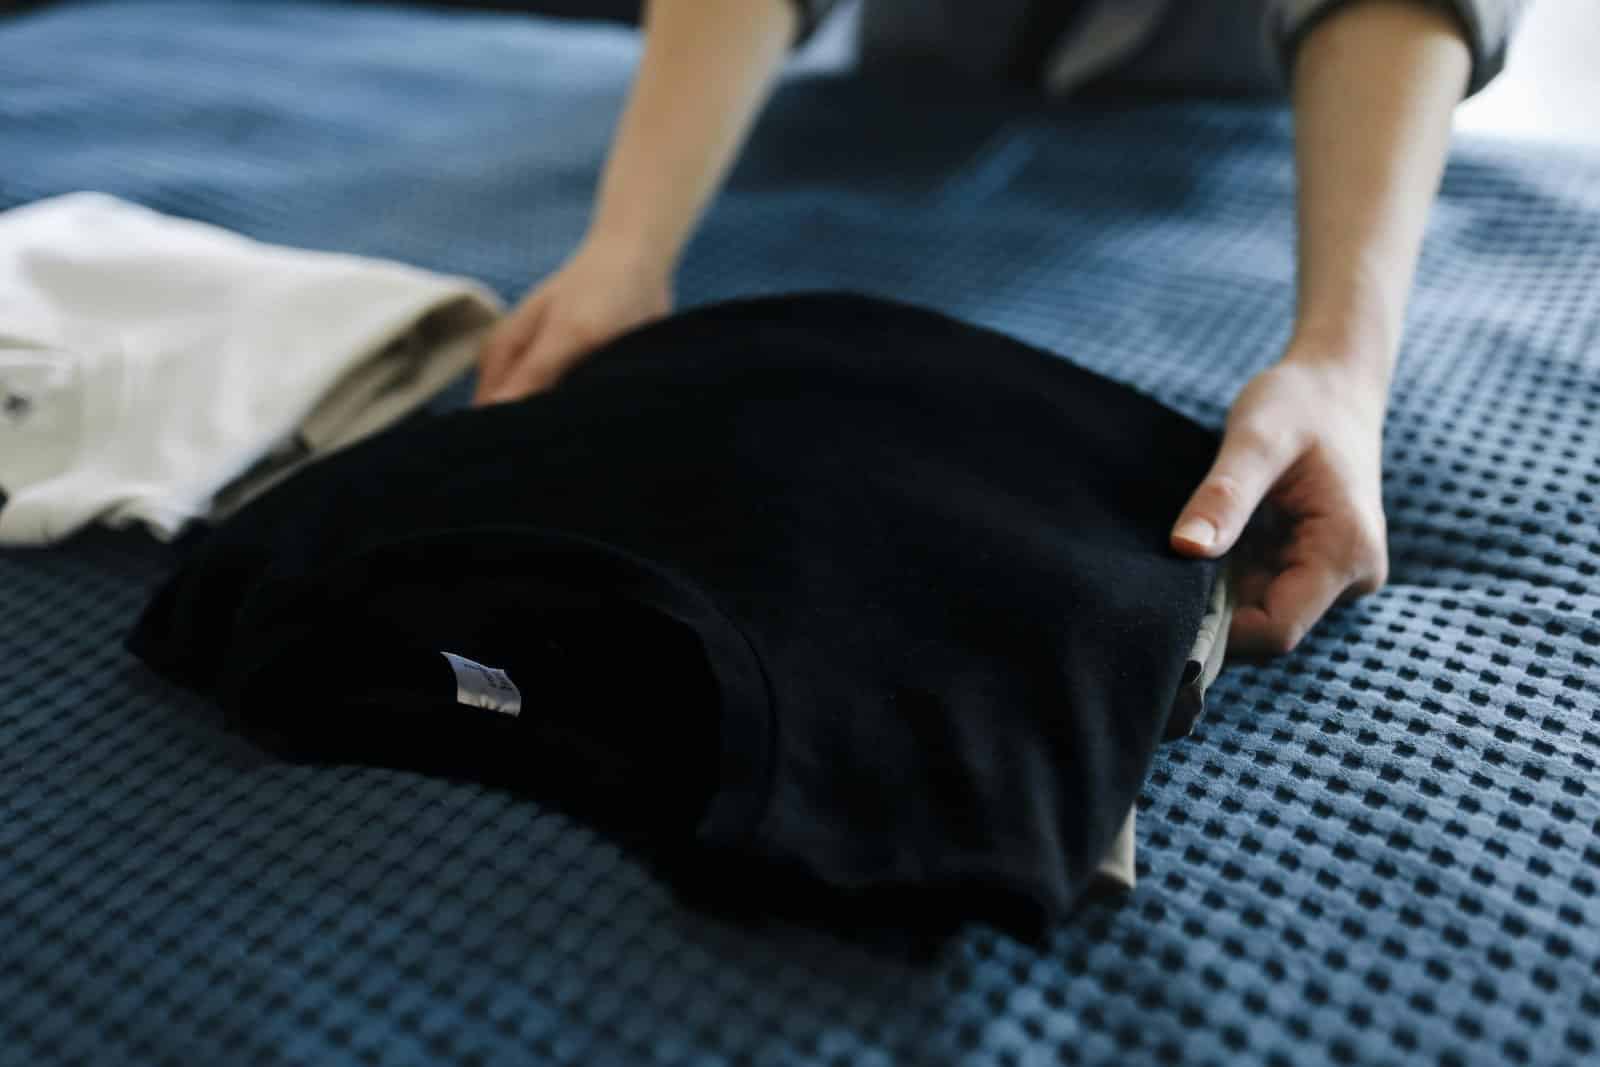 <p class="wp-caption-text">Image Credit: Pexels / Polina Tankilevitch</p>  <p>Rolling your clothes instead of folding them not only saves space but also reduces wrinkles. Tightly rolled clothes take up less room and can be easily slotted into gaps in your suitcase.</p>